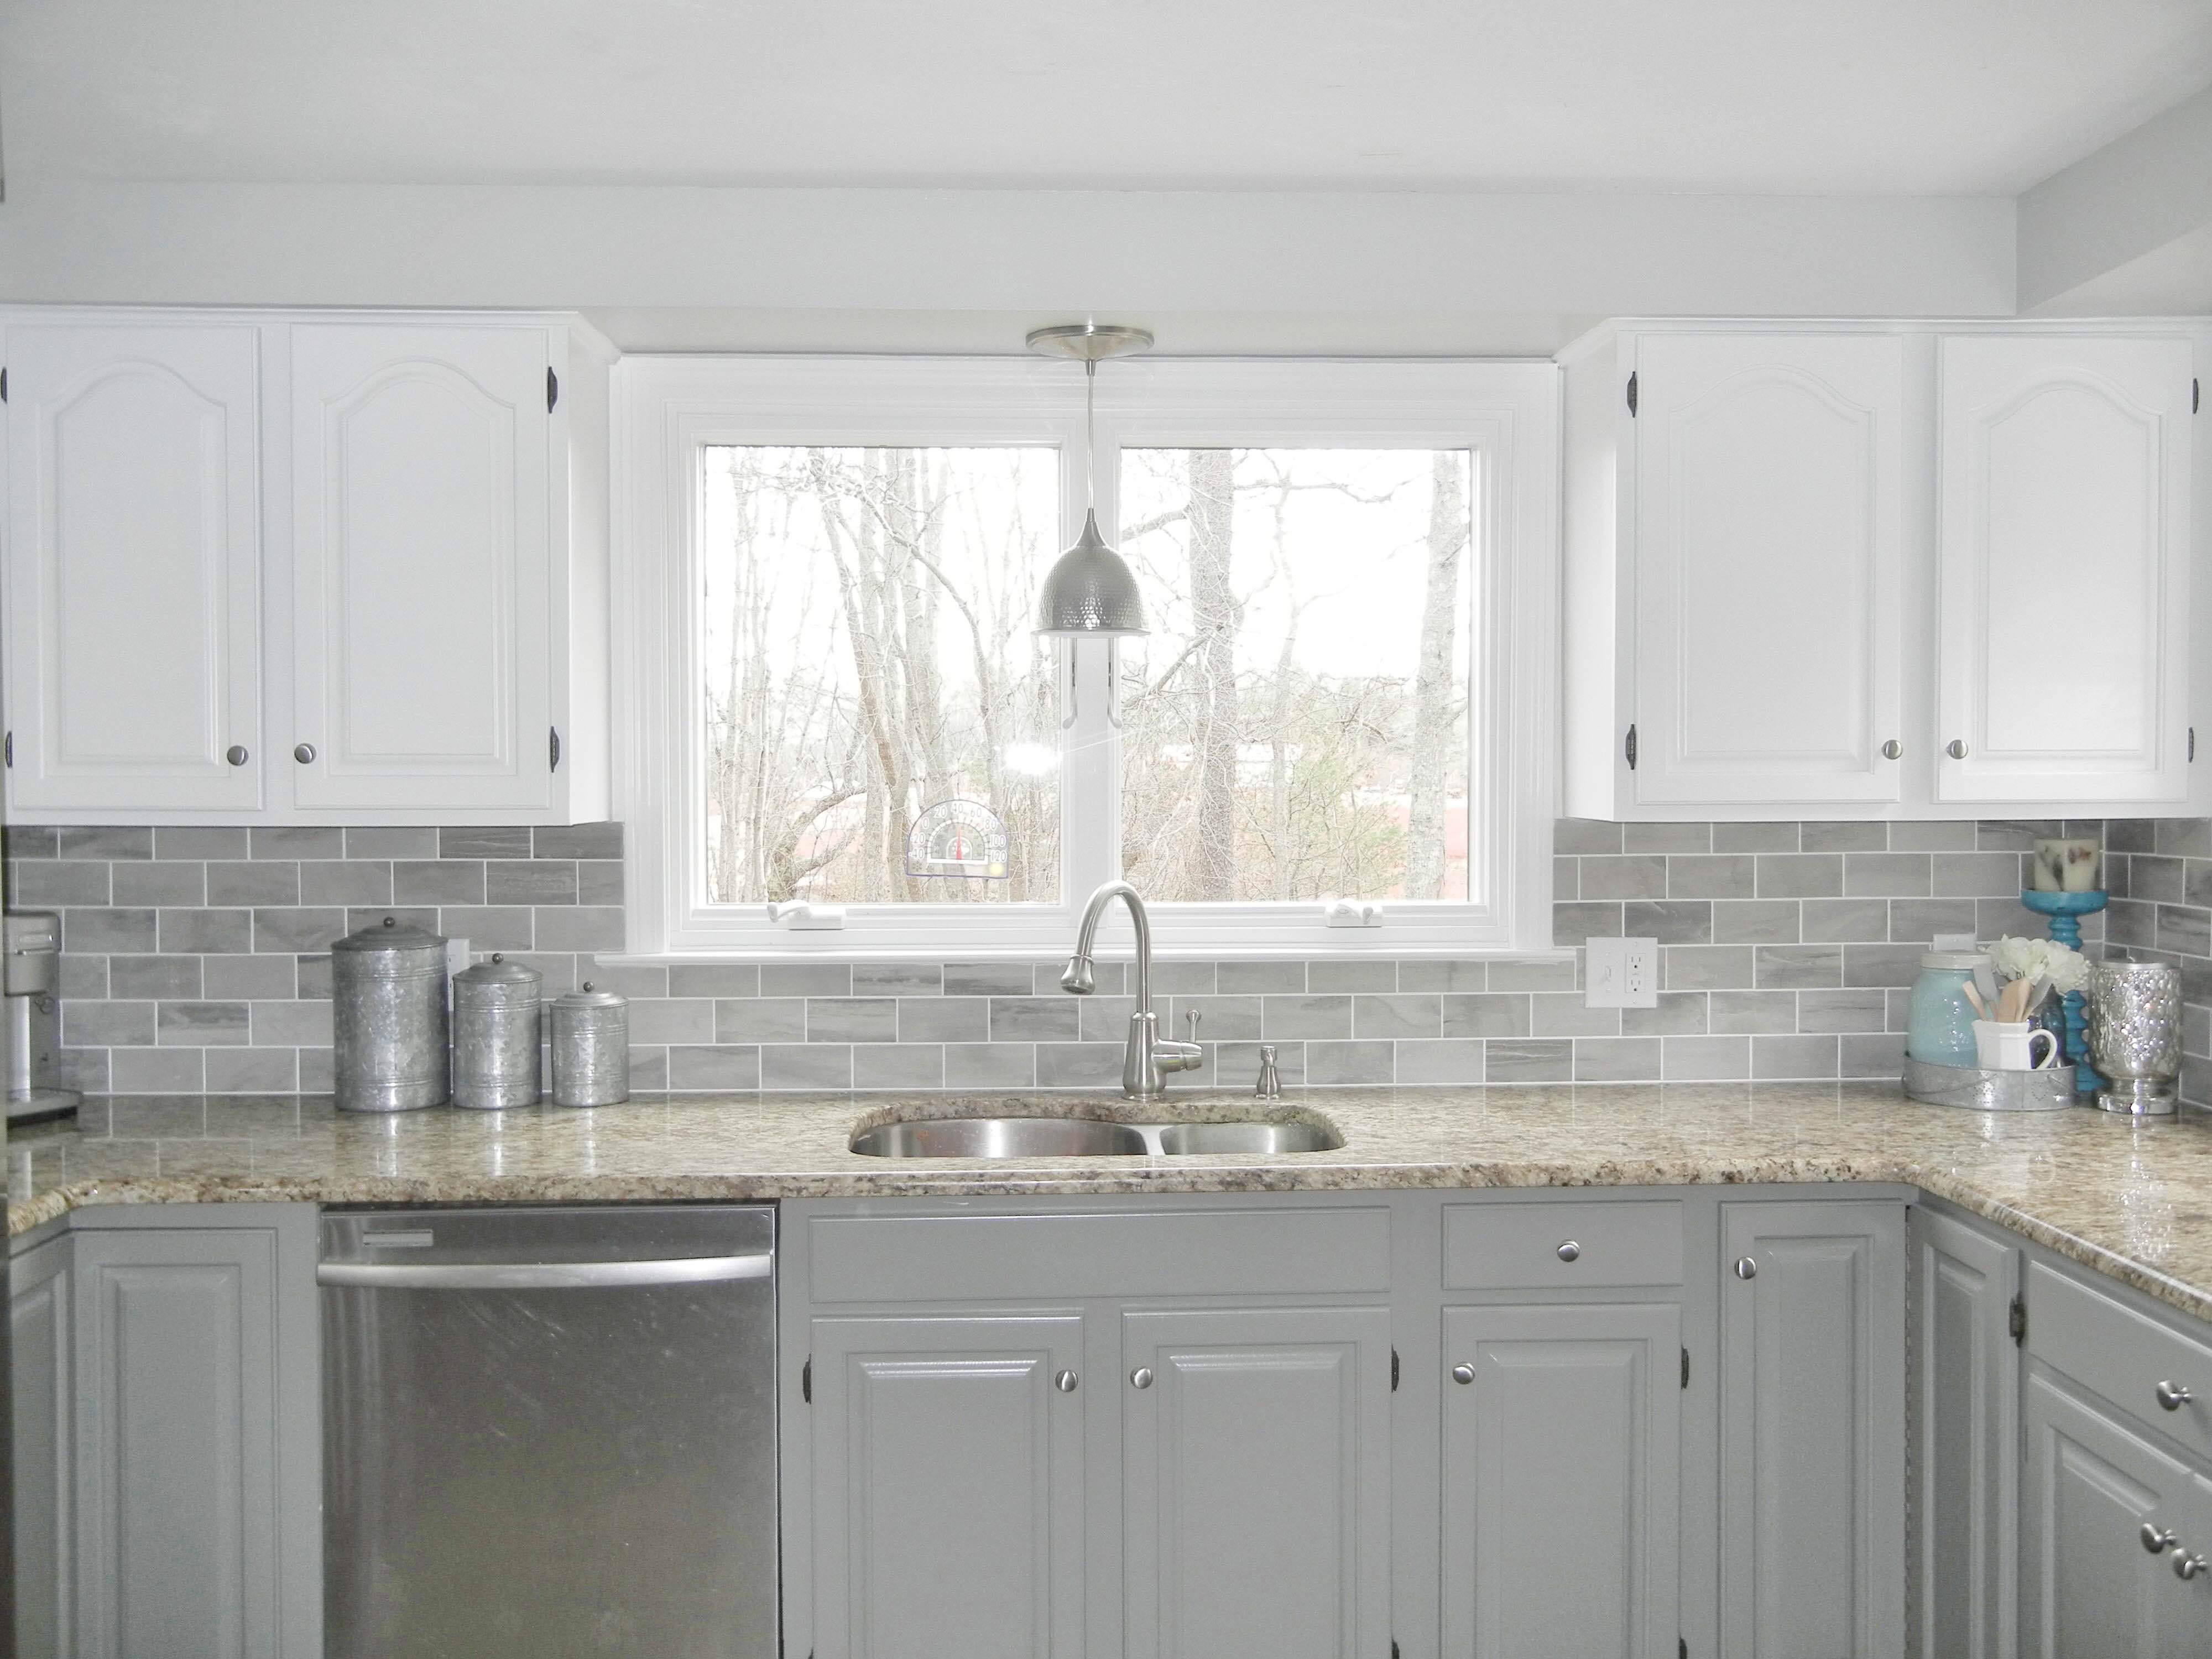 Oak Kitchen Makeover - 2 toned gray and white cabinets and gray subway tile (for under $2000!) GinaKirk.com